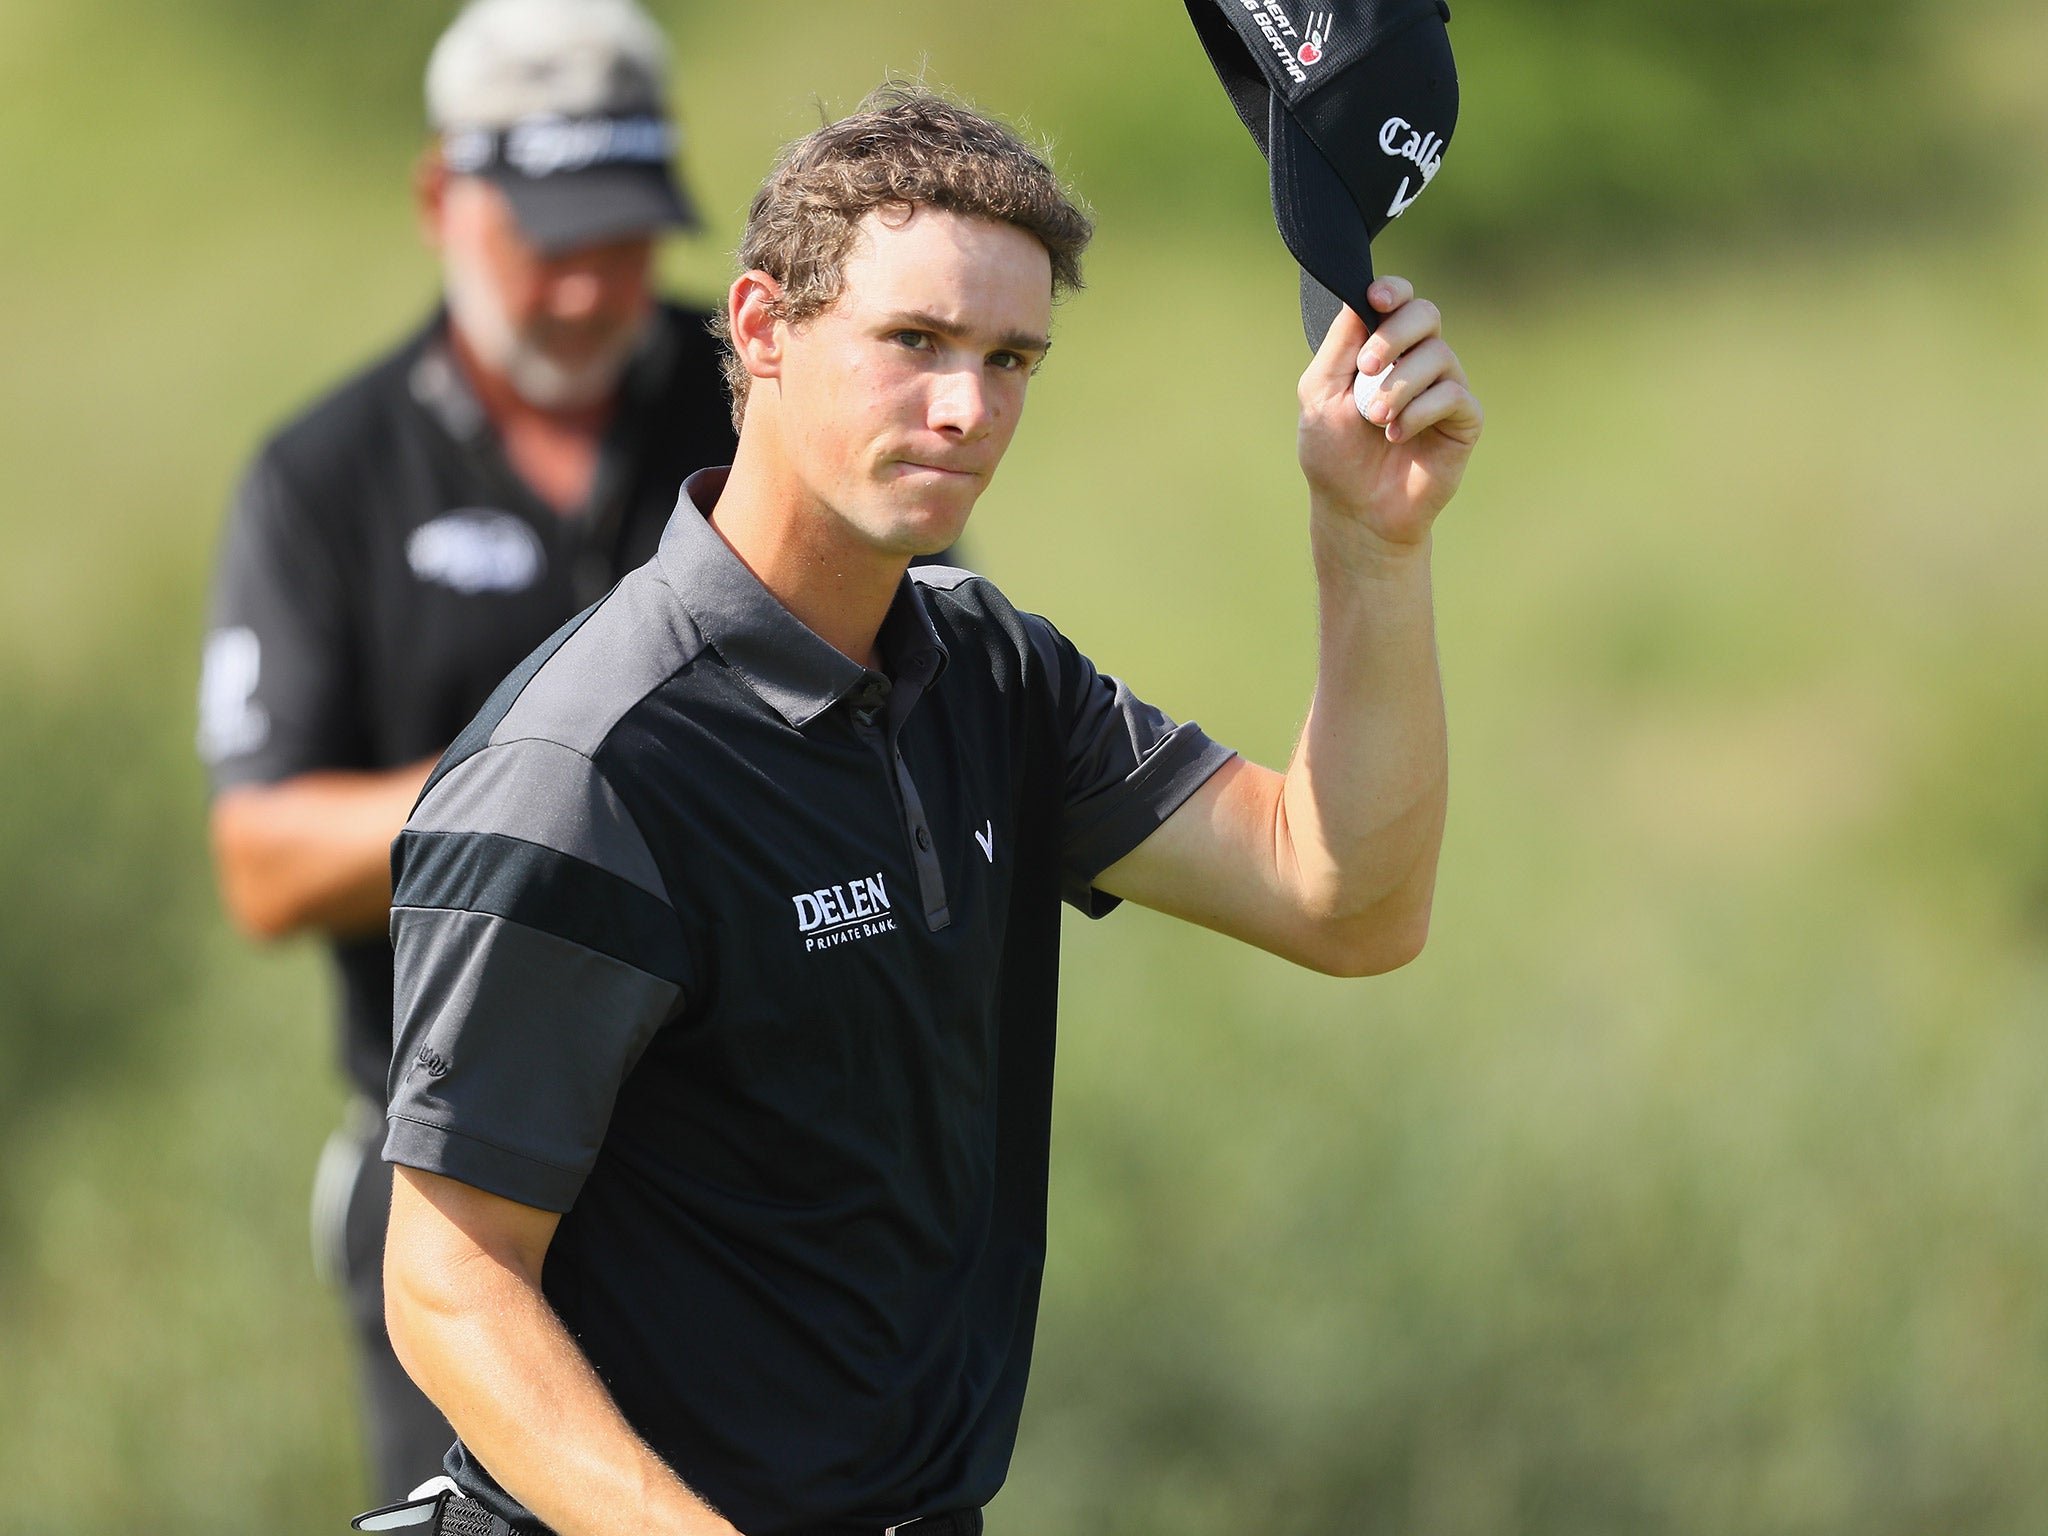 Thomas Pieters has been selected as one of Darren Clarke's wildcards for the Ryder Cup